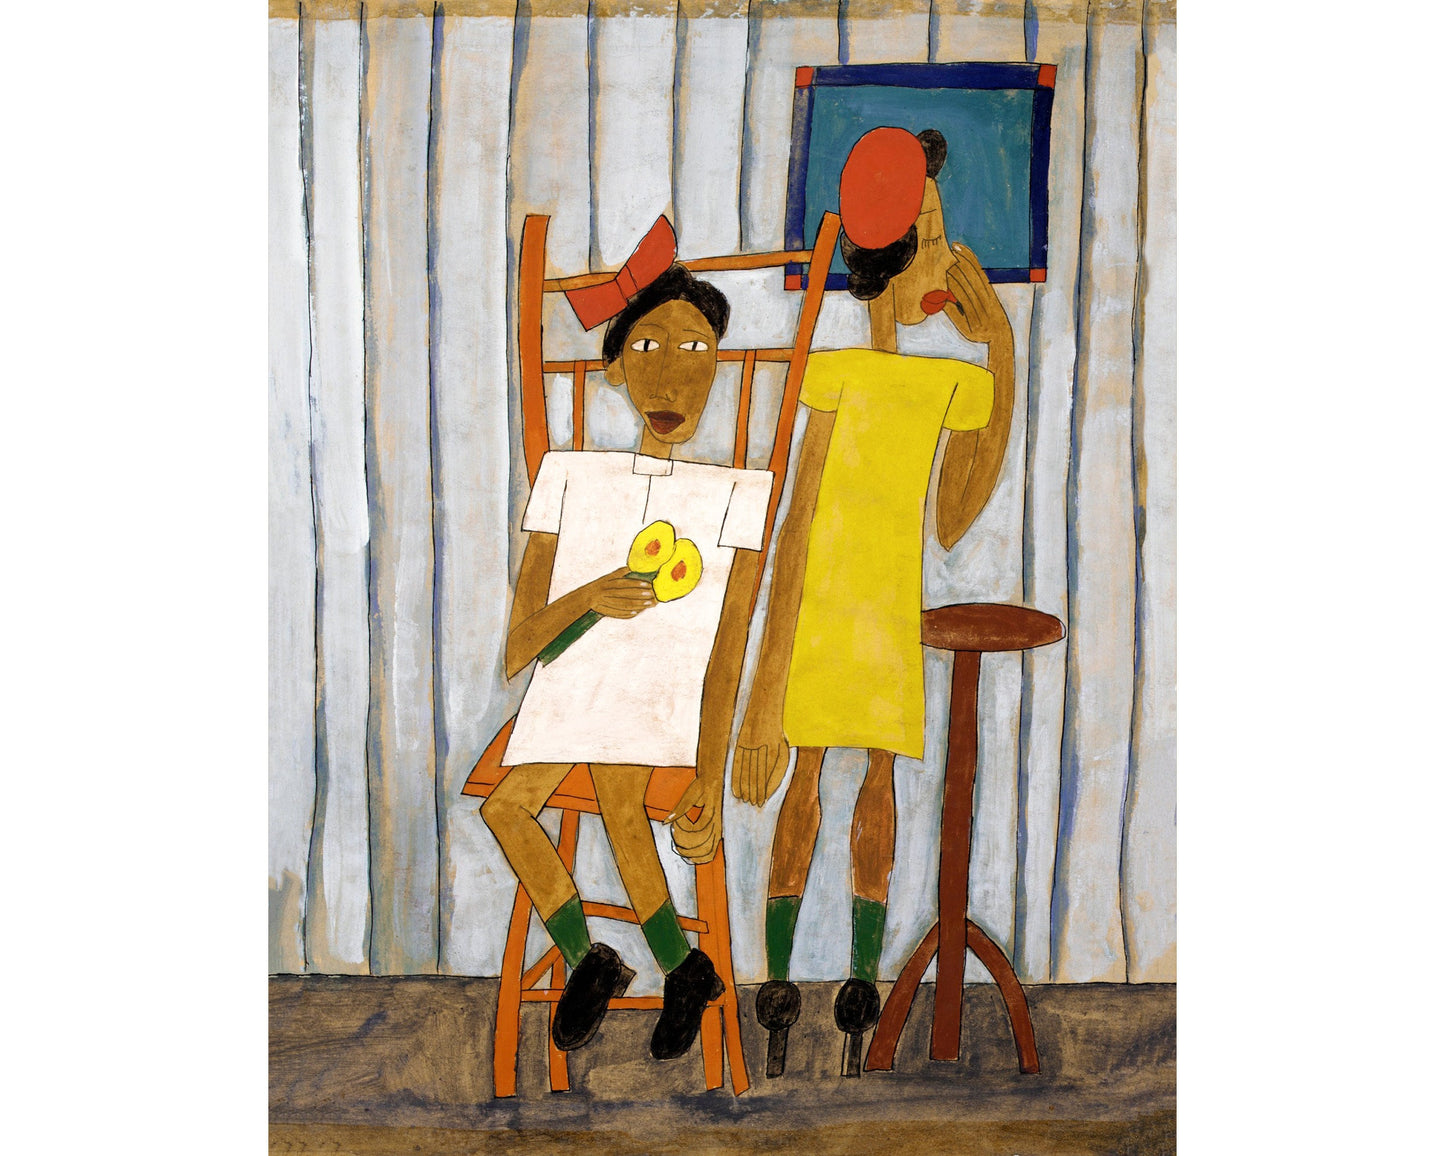 Going Out by William H. Johnson